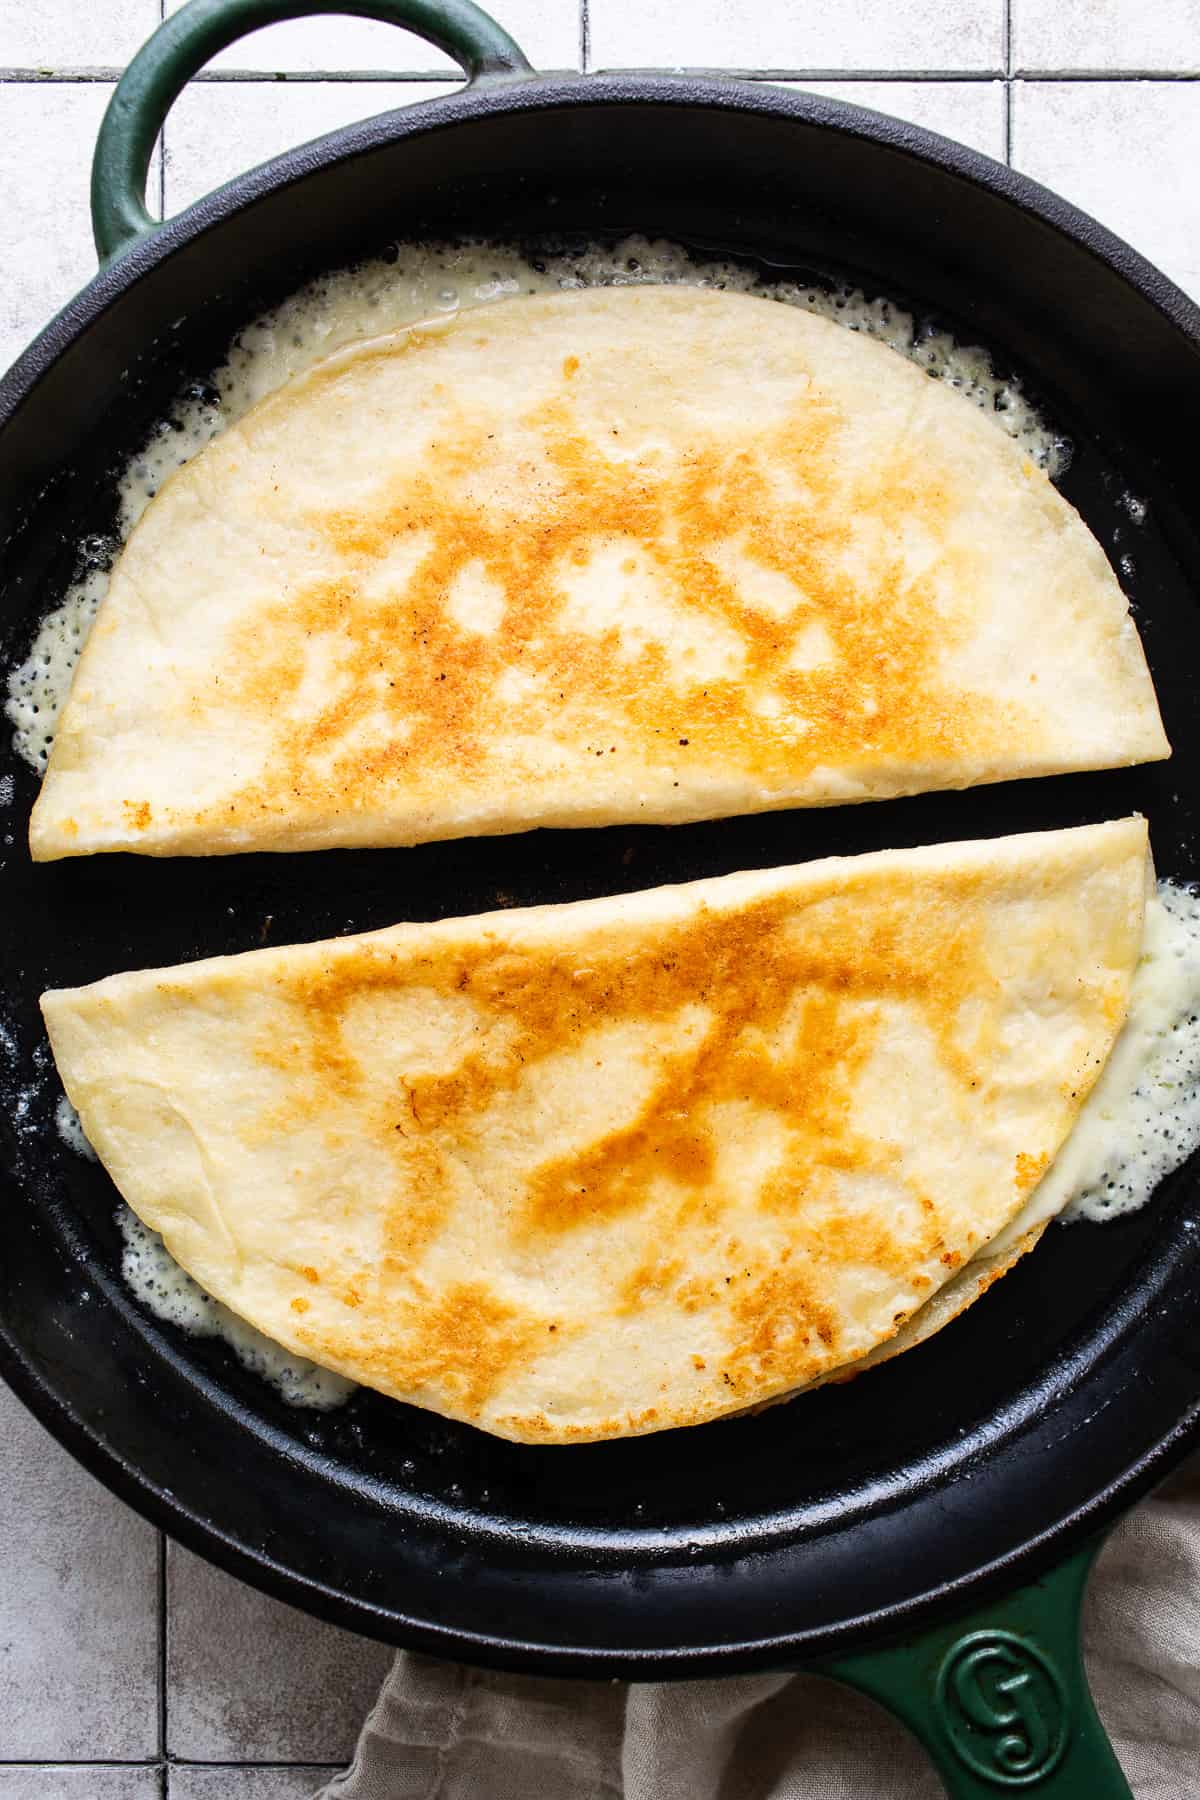 Cheese quesadillas being cooked in a skillet with butter until golden brown and crispy on the outside.